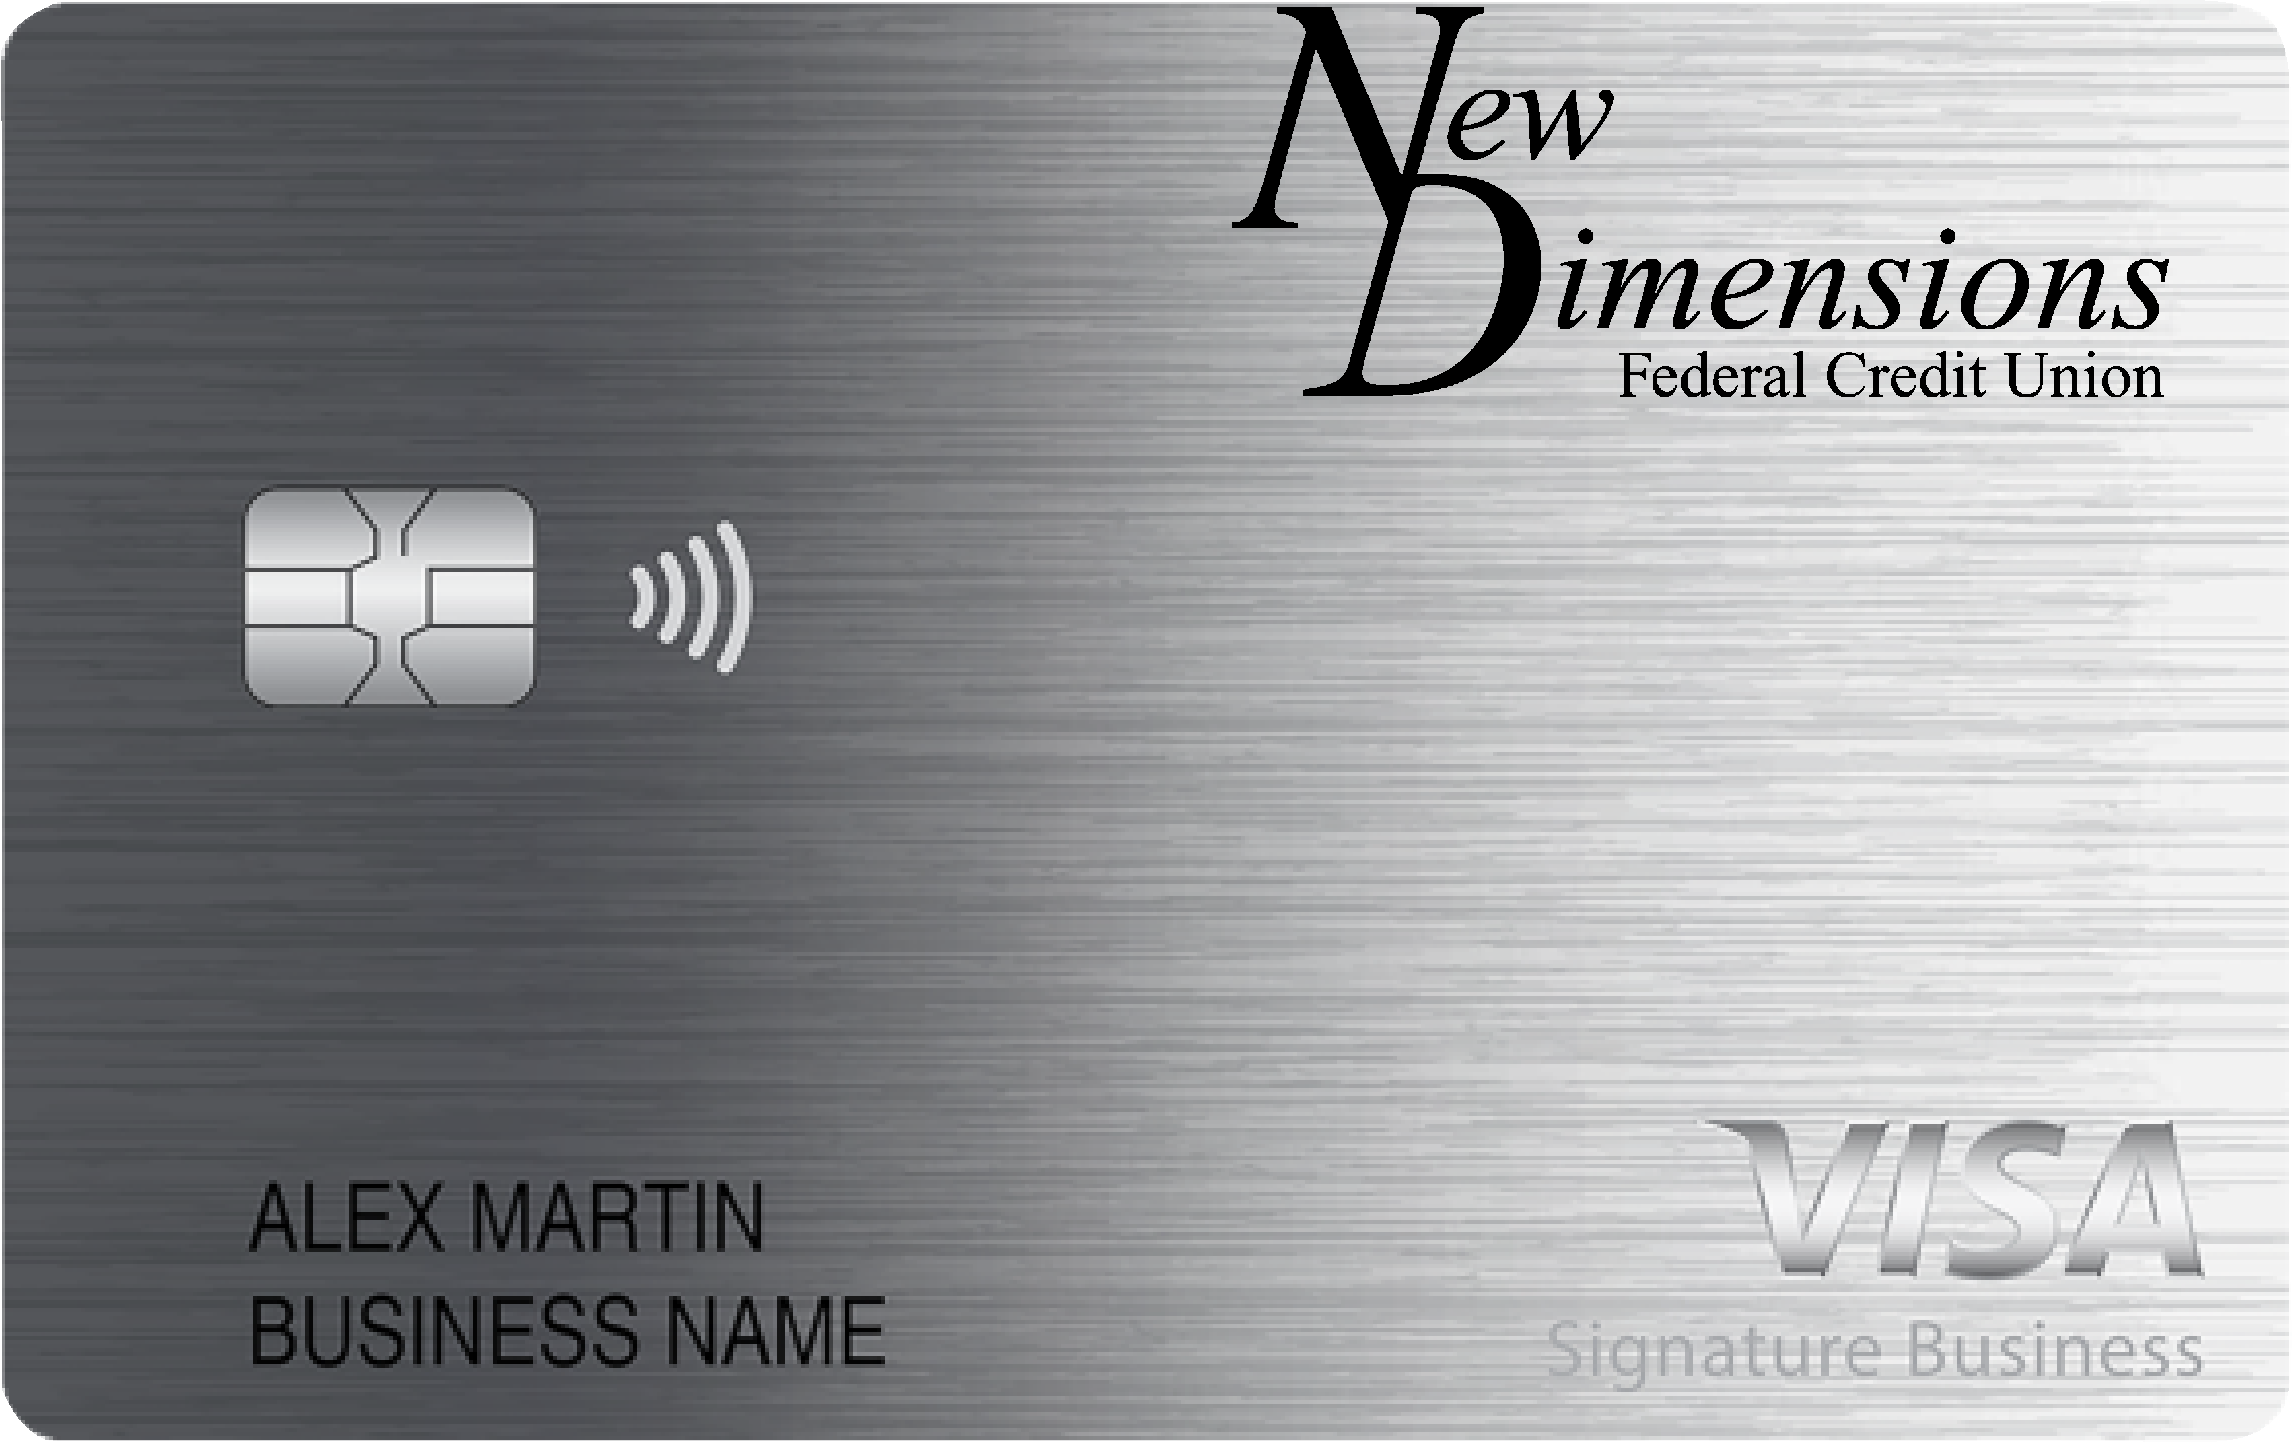 New Dimensions Federal Credit Union Smart Business Rewards Card